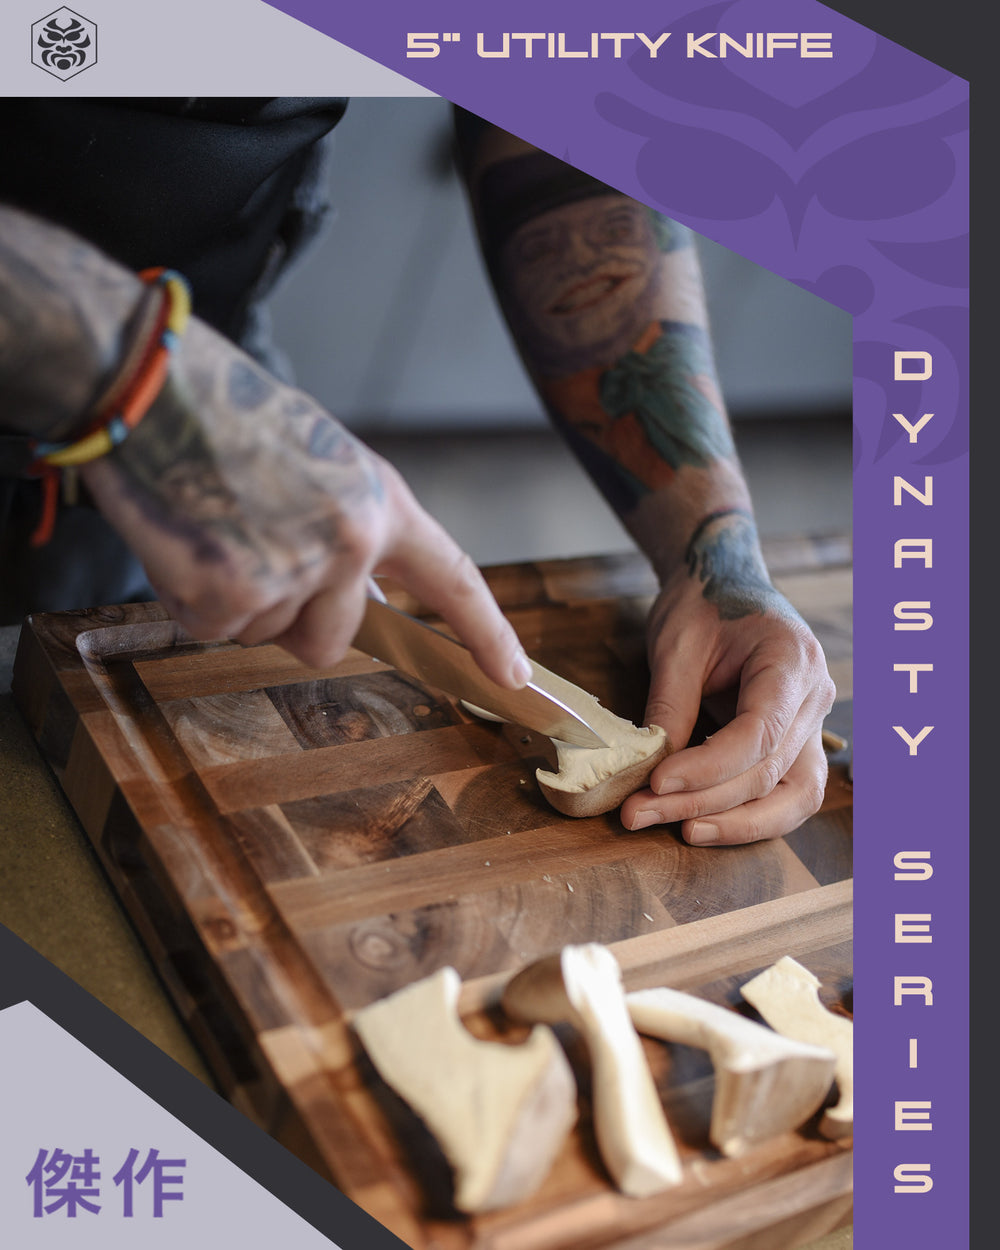 A chef prepared king trumpet mushrooms with the Dynasty Utility Knife